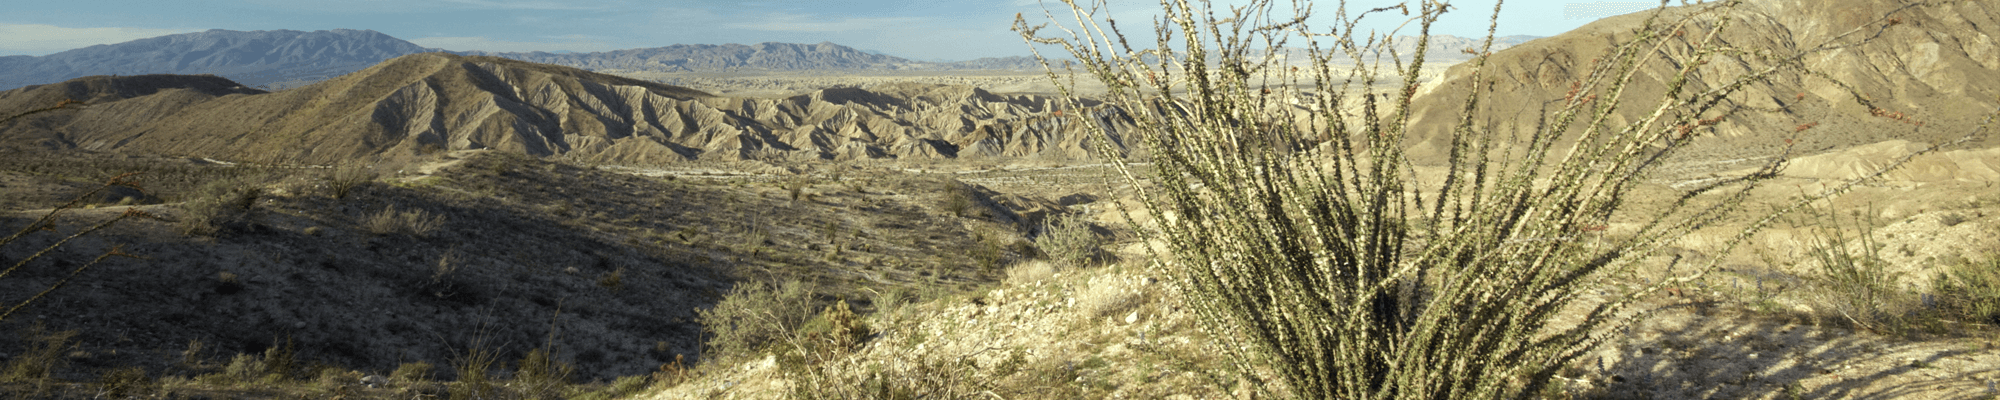 overlook of California desert with plant in front